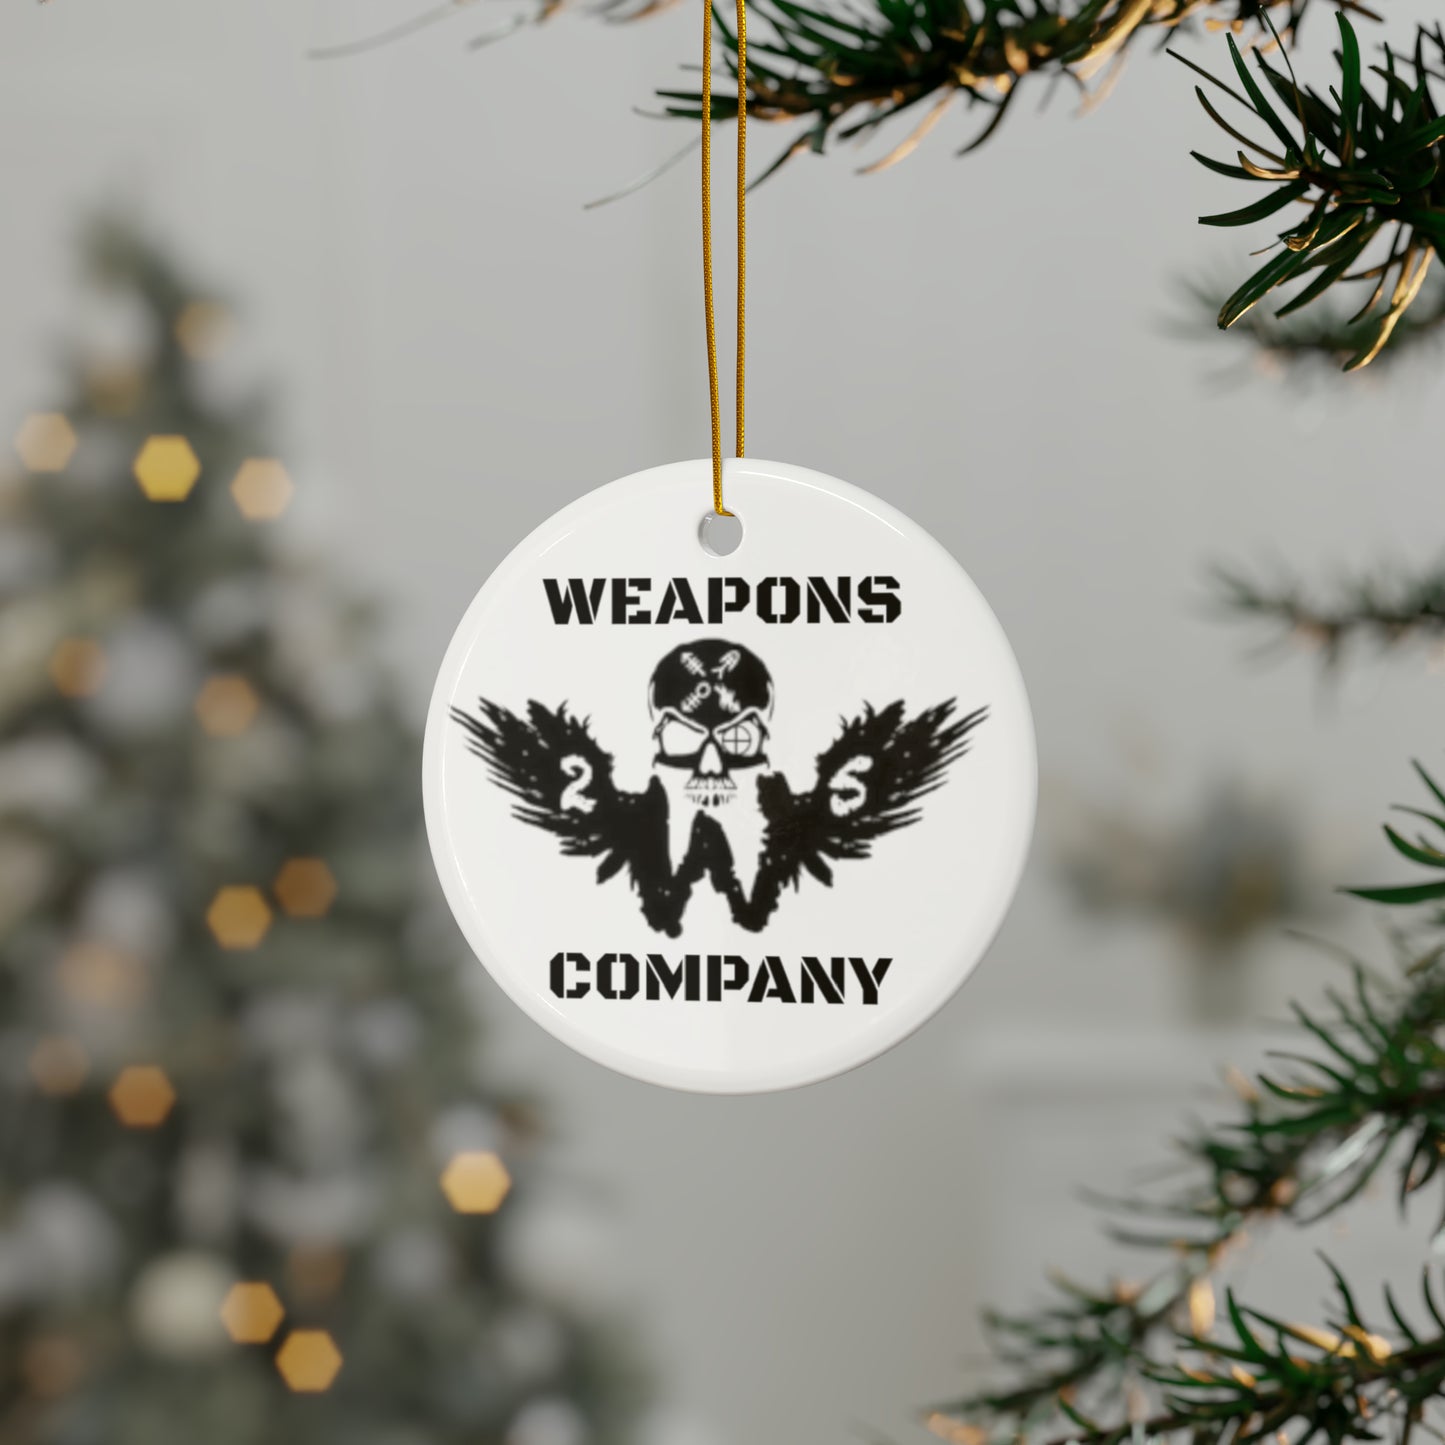 Weapons Co 2/5 Ceramic Ornament